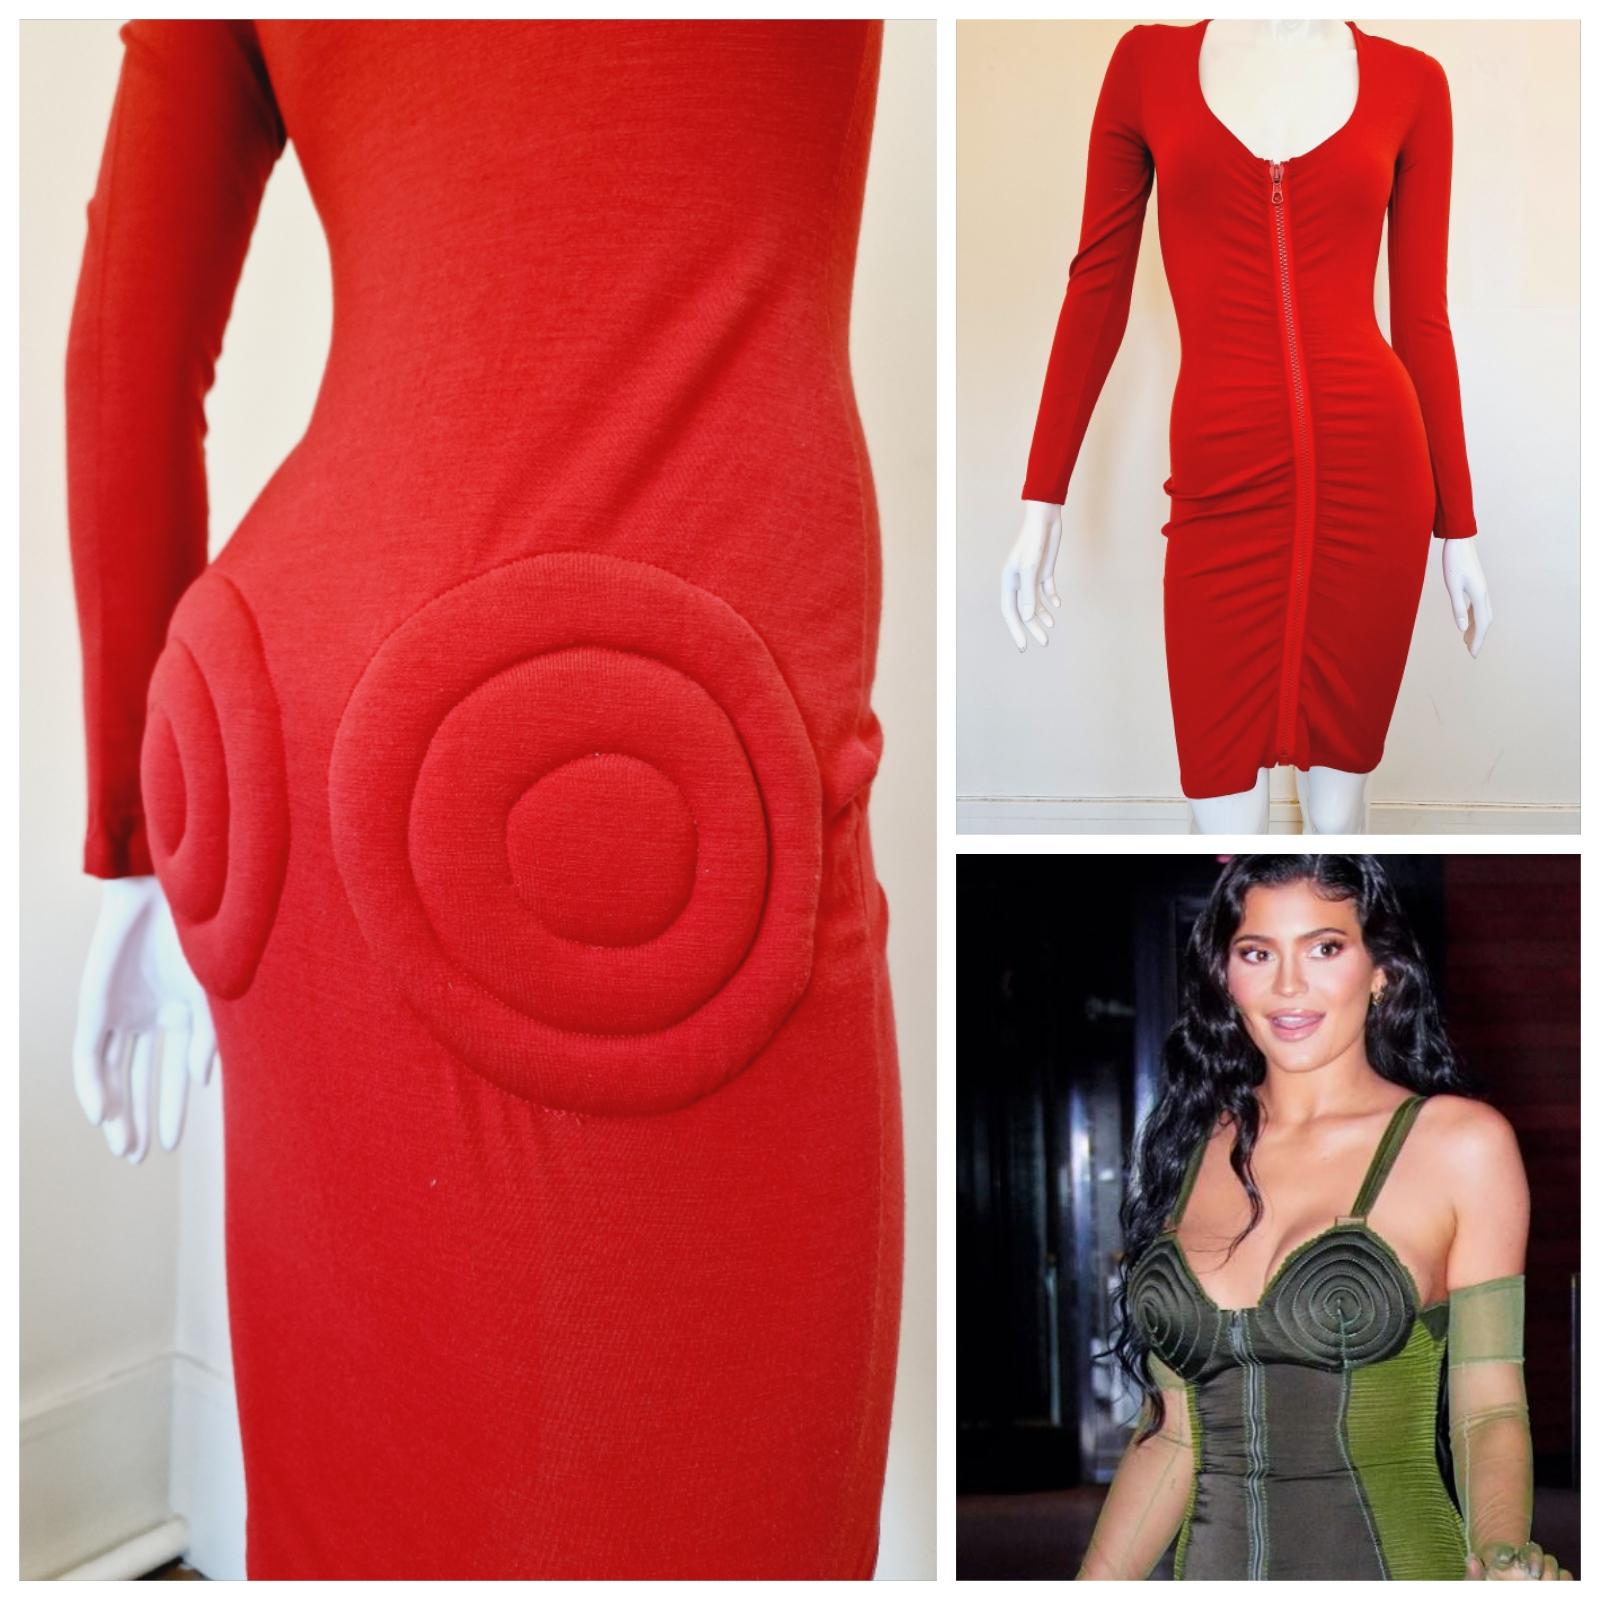 Padded bottom dress by Jean Paul Gaultier!
From the early 80s Gaultier`s era!
Deep v-neck with the zipper.

A similar dress from this collection was worn by Kylie Jenner, she hit the red carpet at the 72nd Annual Parsons Benefit in New York City on